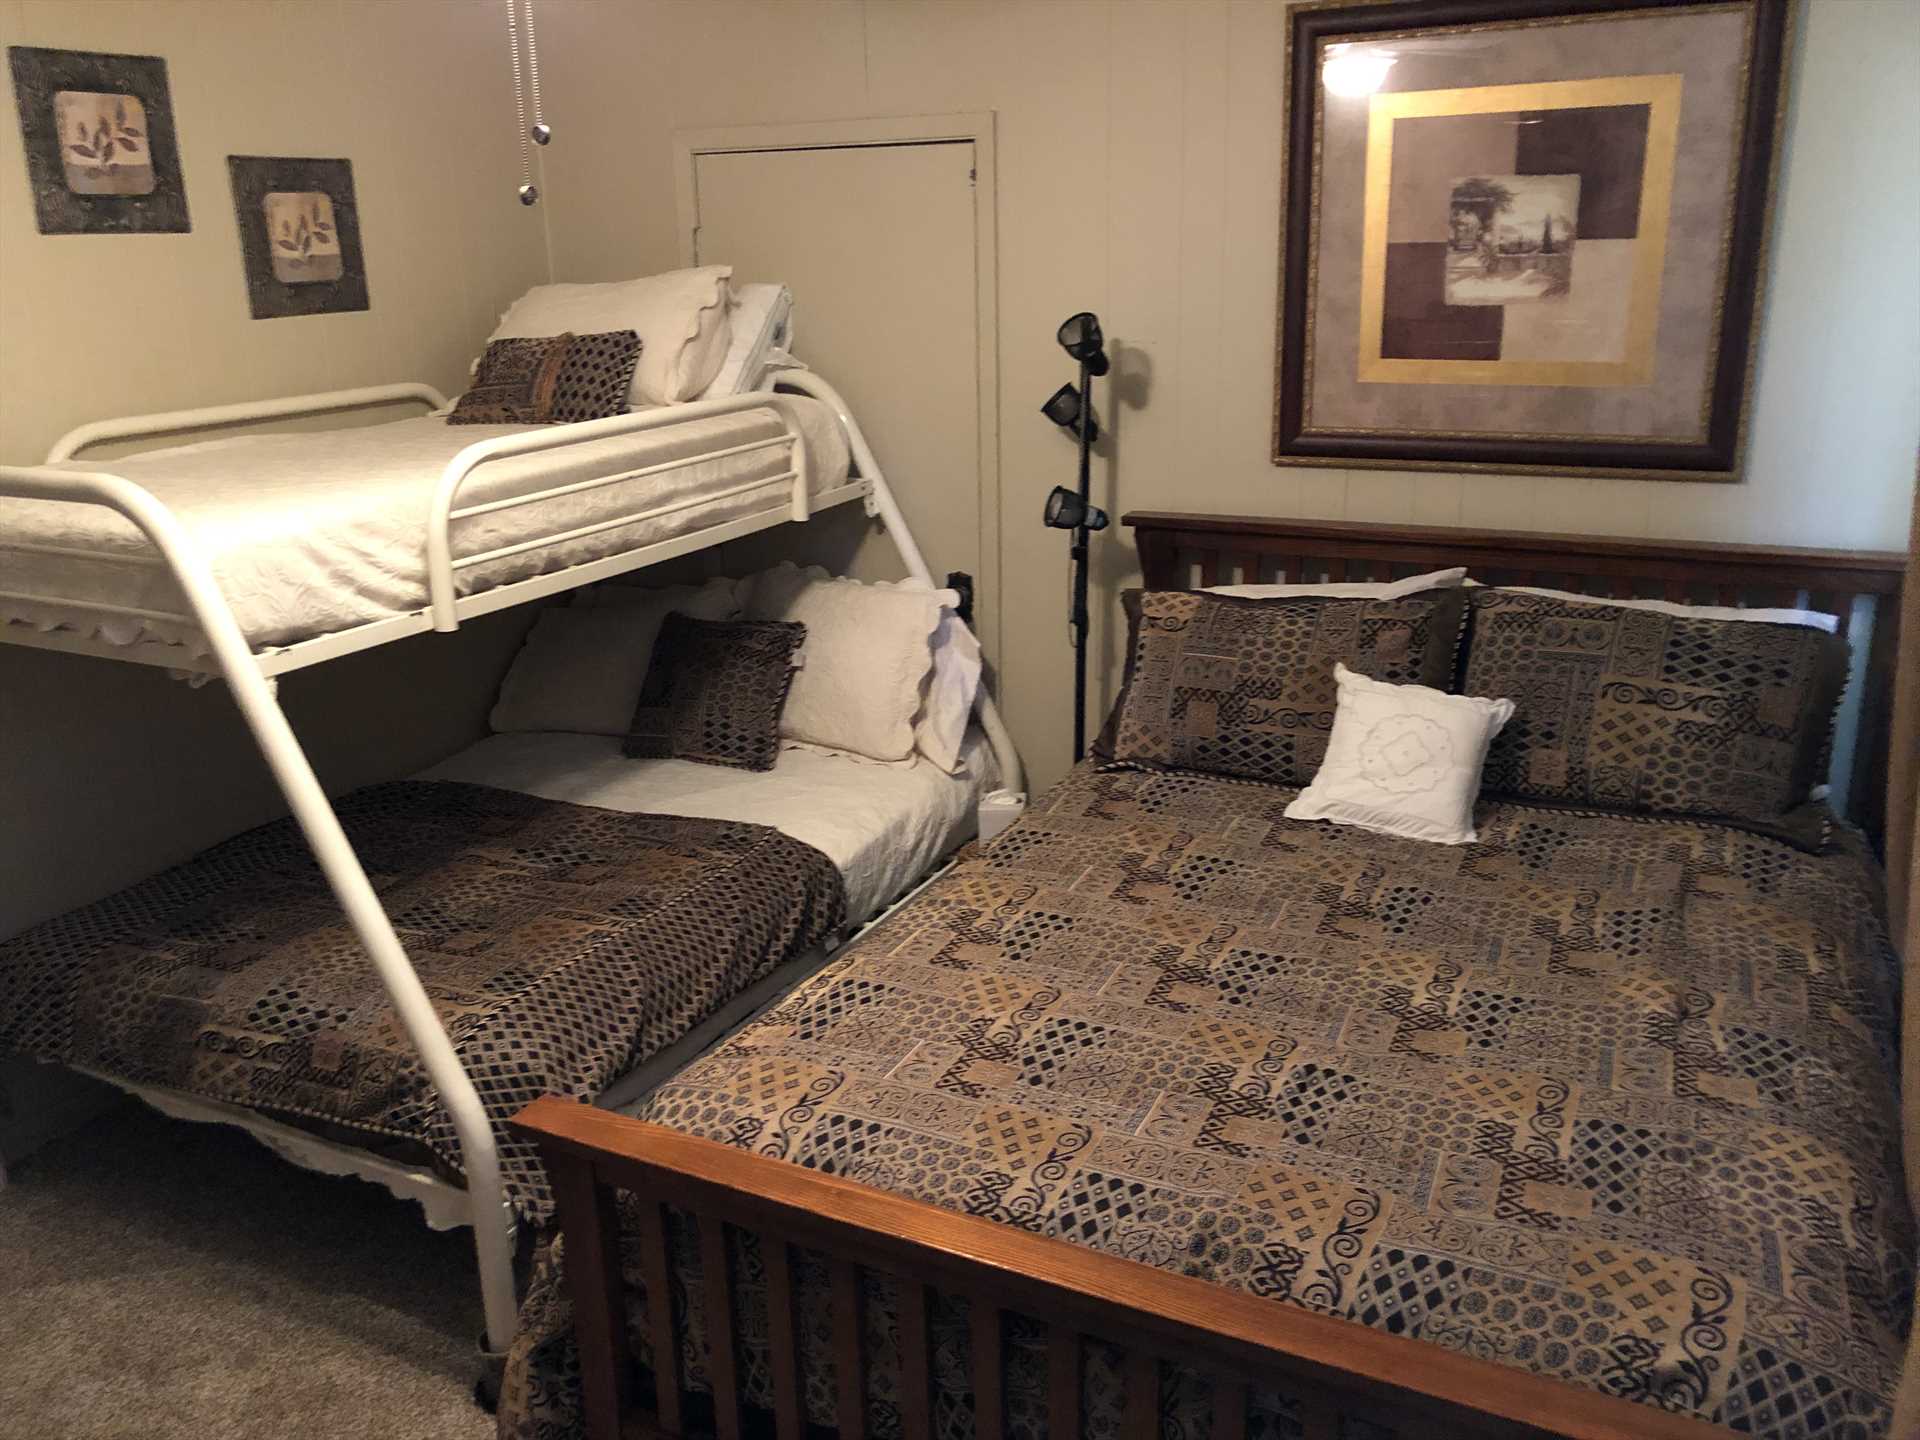                                                 Up to five guests can sleep peacefully in the third bedroom, with a queen bed and a double down/twin up bunk bed. This space serves perfectly as a kids' room!